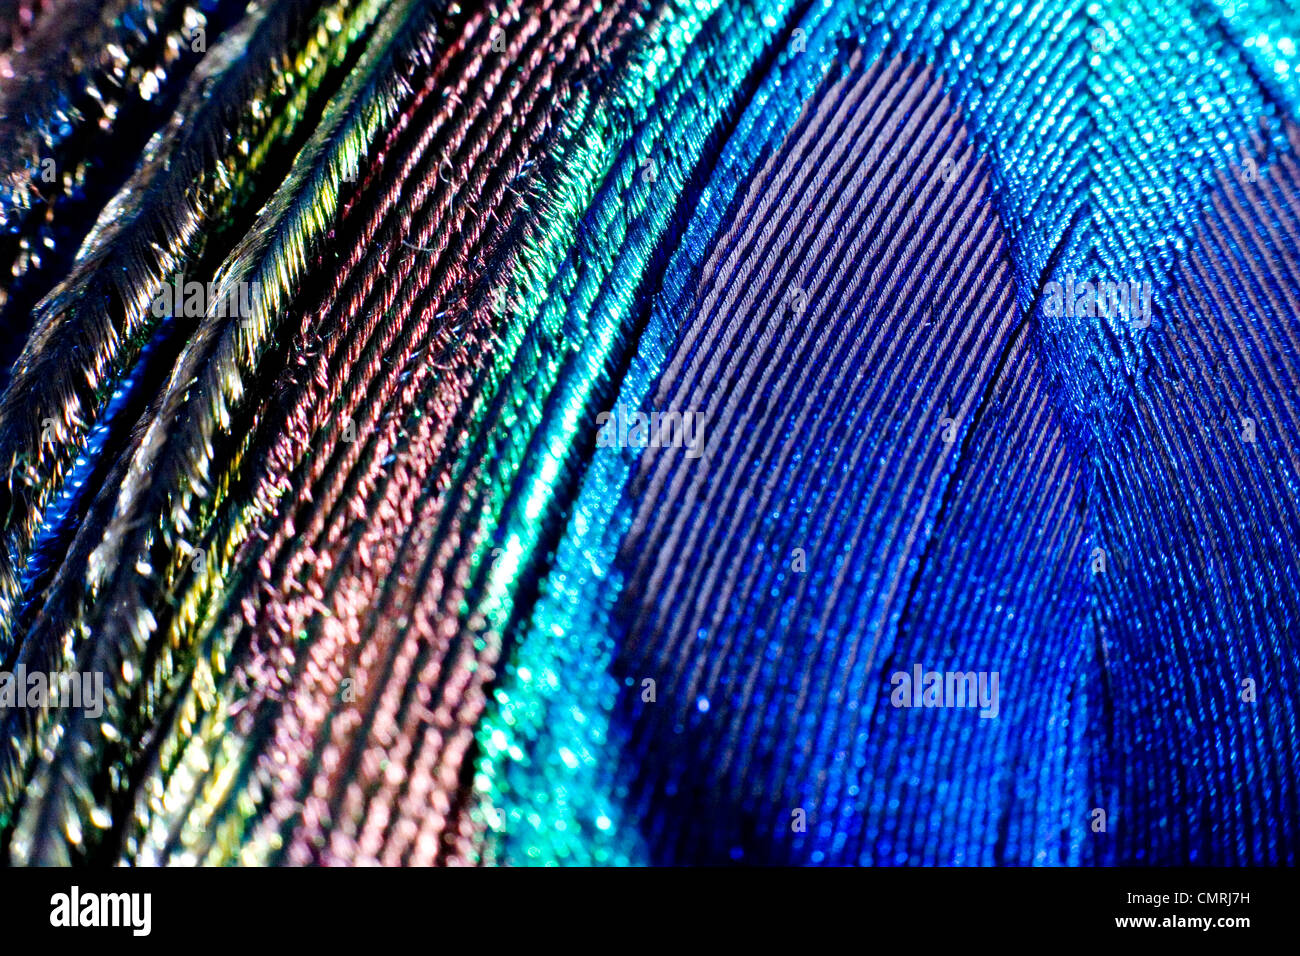 Macro of the Eye of a Peacock Feather Stock Photo